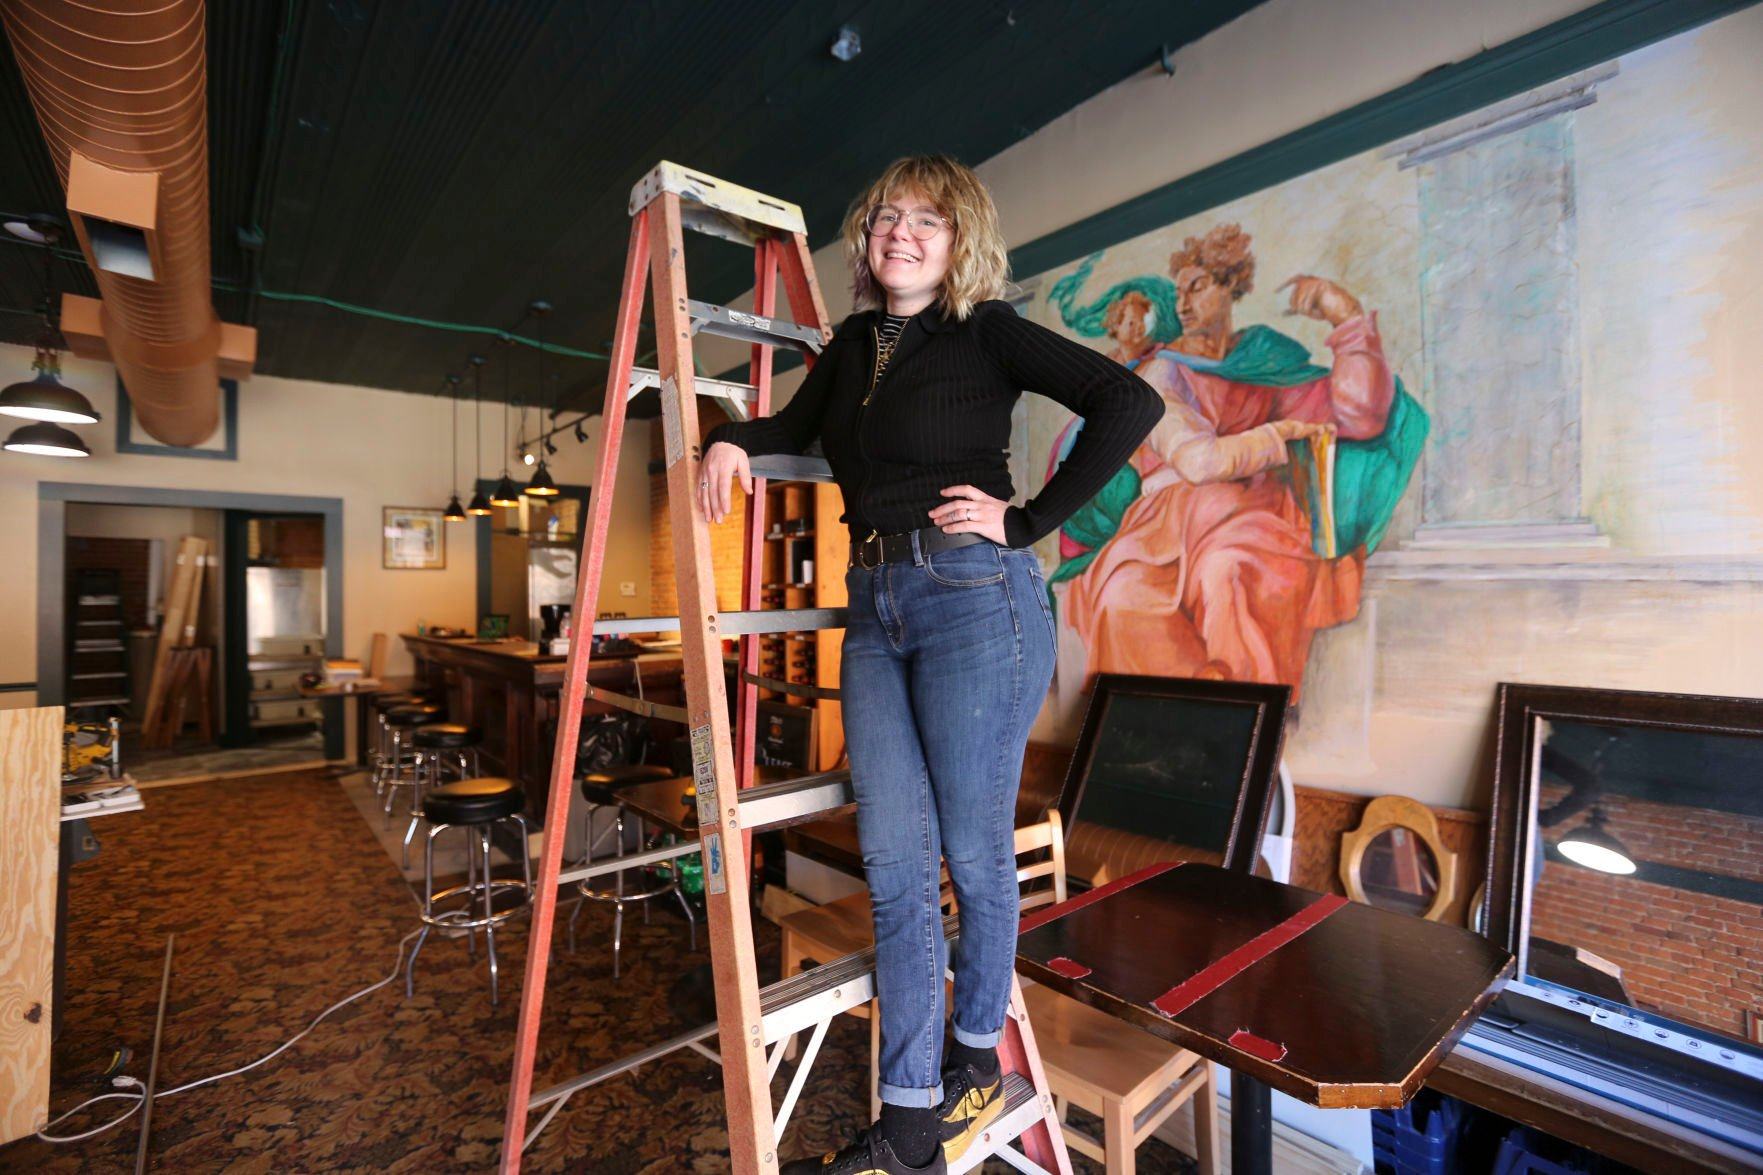 Sophie Pfile and her husband, Tom, own Cannova’s Pizzeria at 247 N. Main St. in Galena, Ill. They are currently renovating the interior of the restaurant and hope to again open it to dine-in customers in early March.    PHOTO CREDIT: Dave Kettering